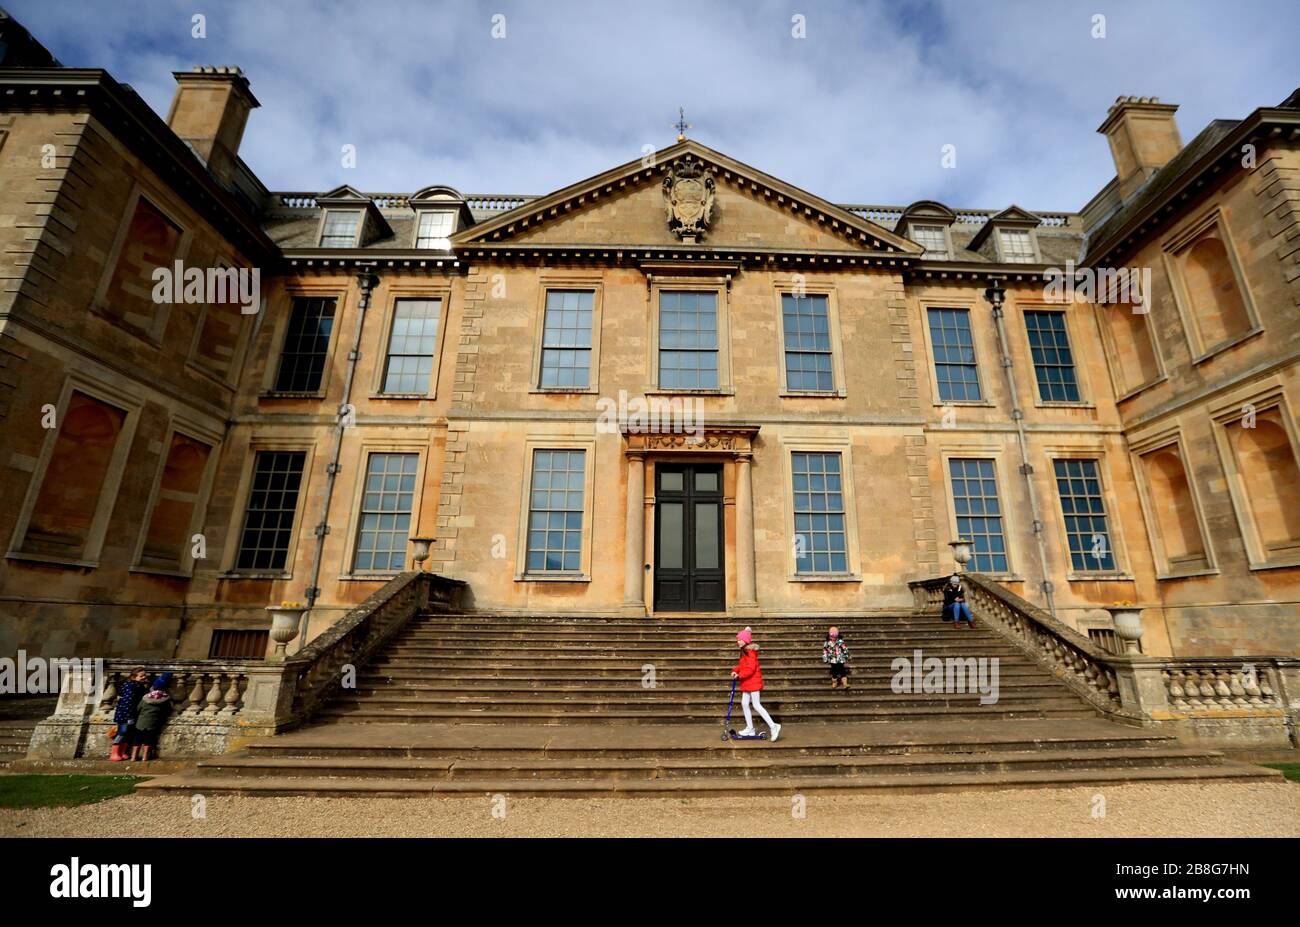 A general view of people walking around the grounds of Belton House in Grantham, which has been opened up free of charge after Boris Johnson ordered pubs, cafes, nightclubs, bars, restaurants, theatres, leisure centres and gyms to close to fight coronavirus. Stock Photo